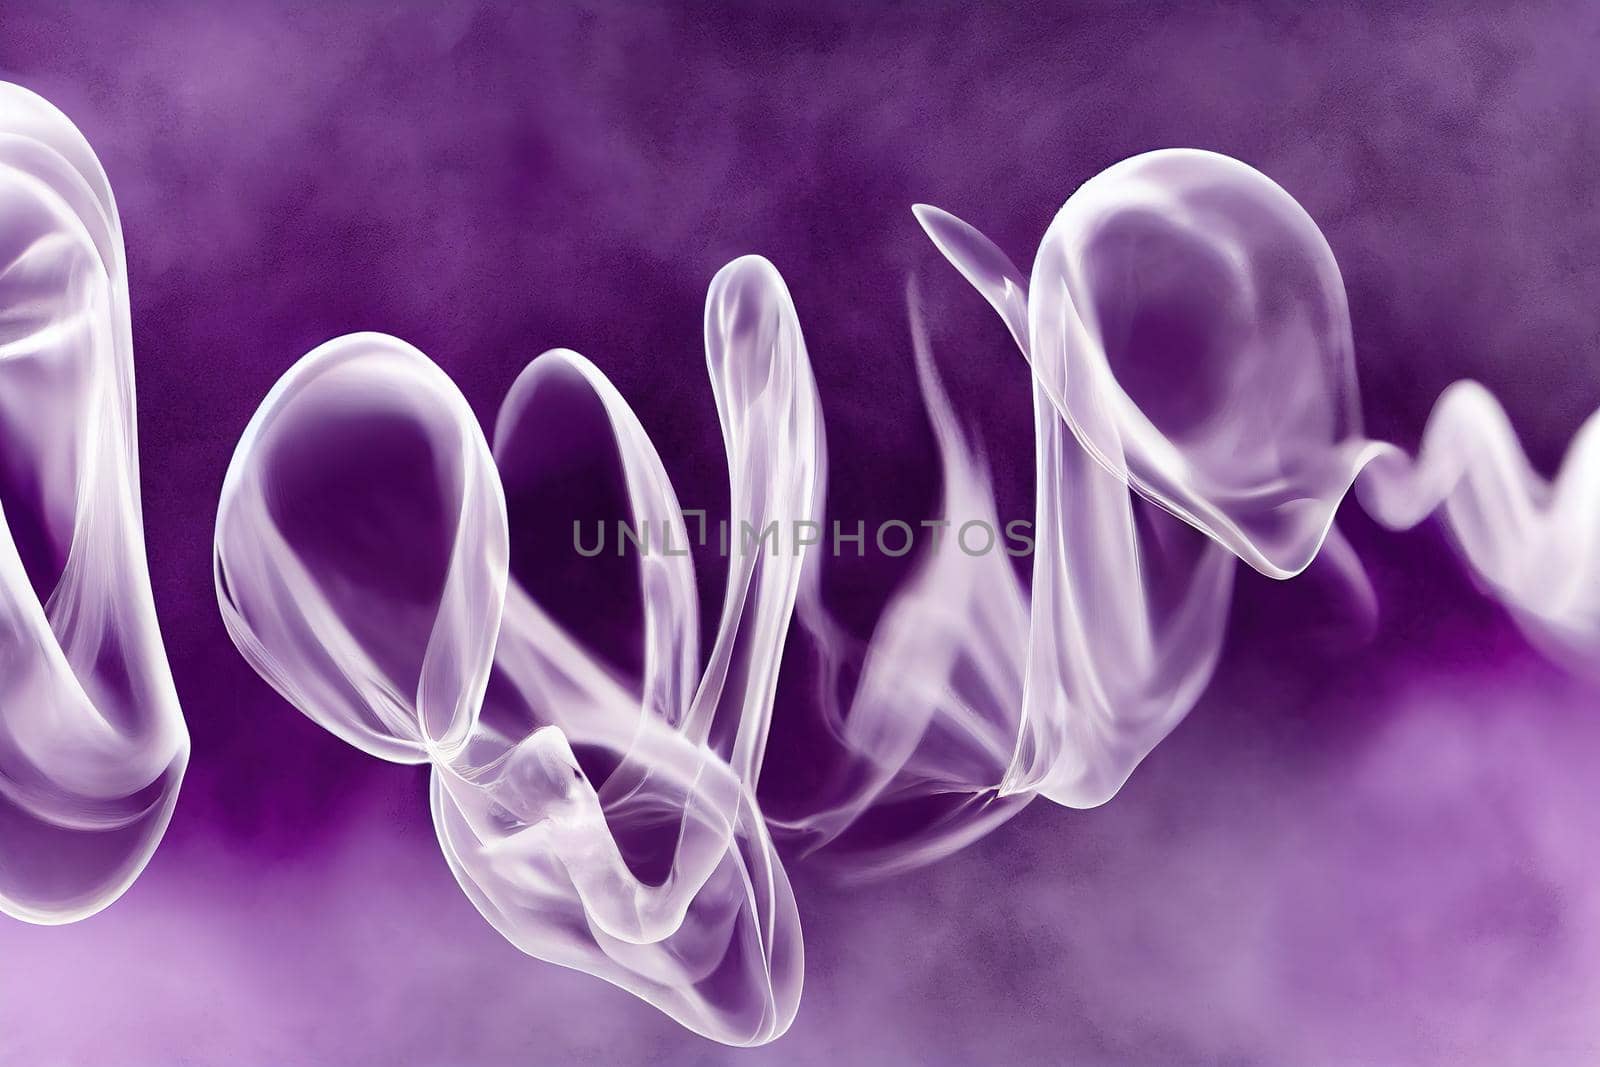 Evaporation liquify text on purple abstract background by 2ragon